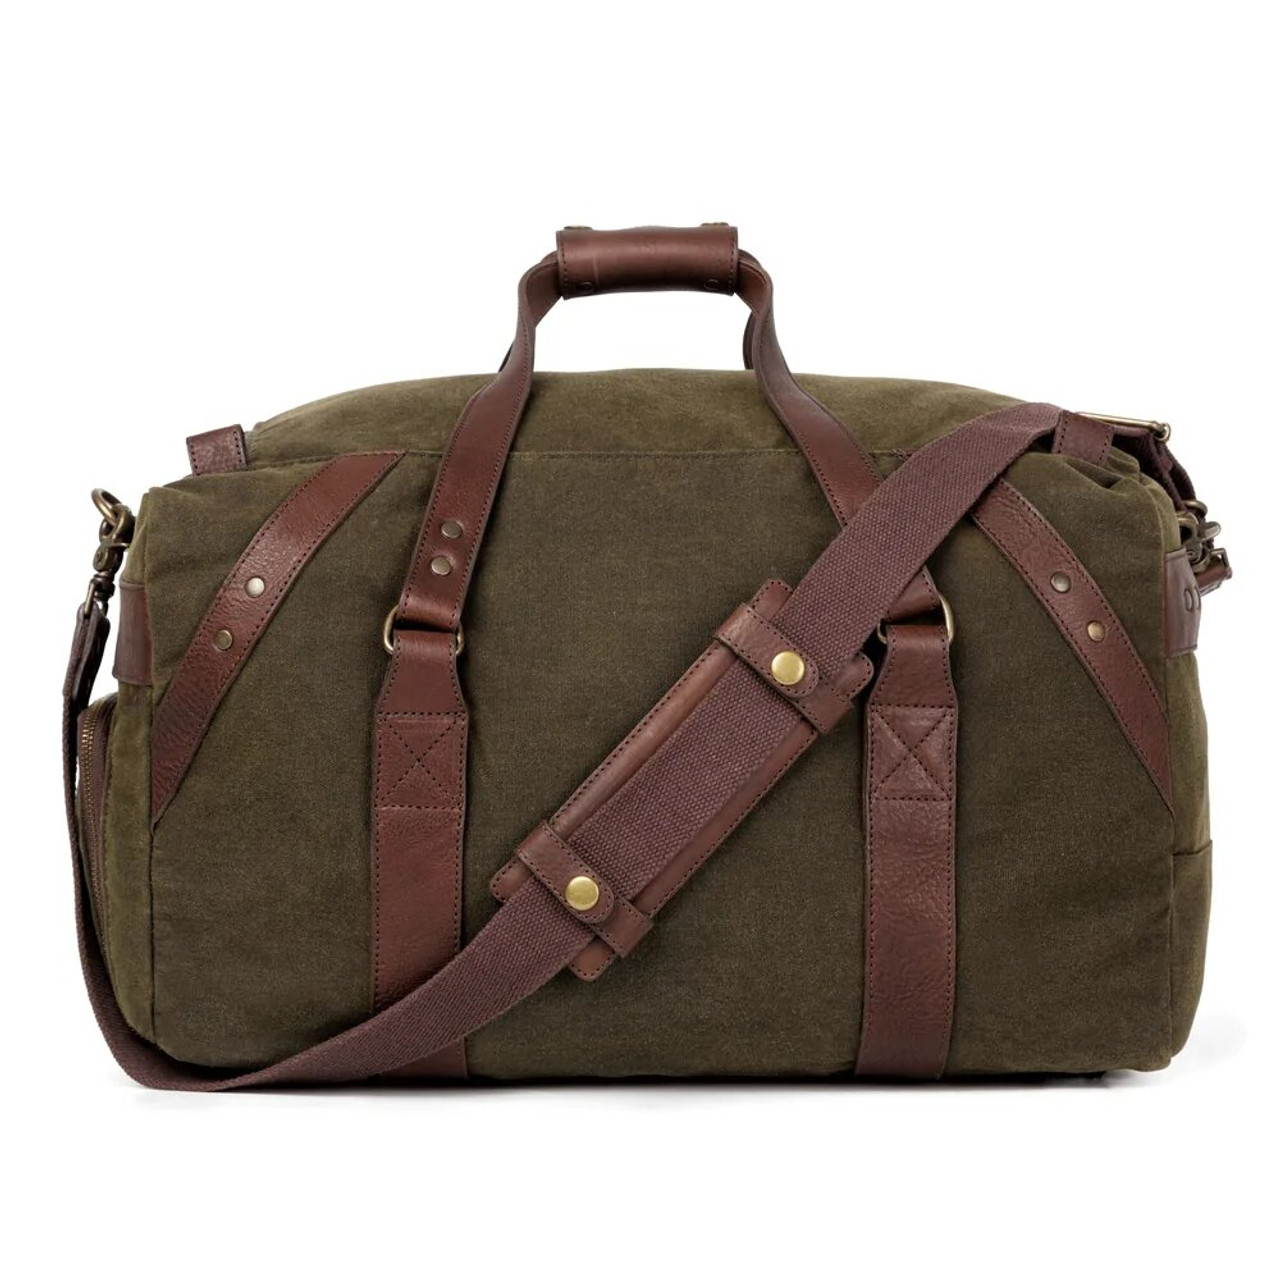 Campaign Waxed Canvas Rolling Carry-On Duffle Bag